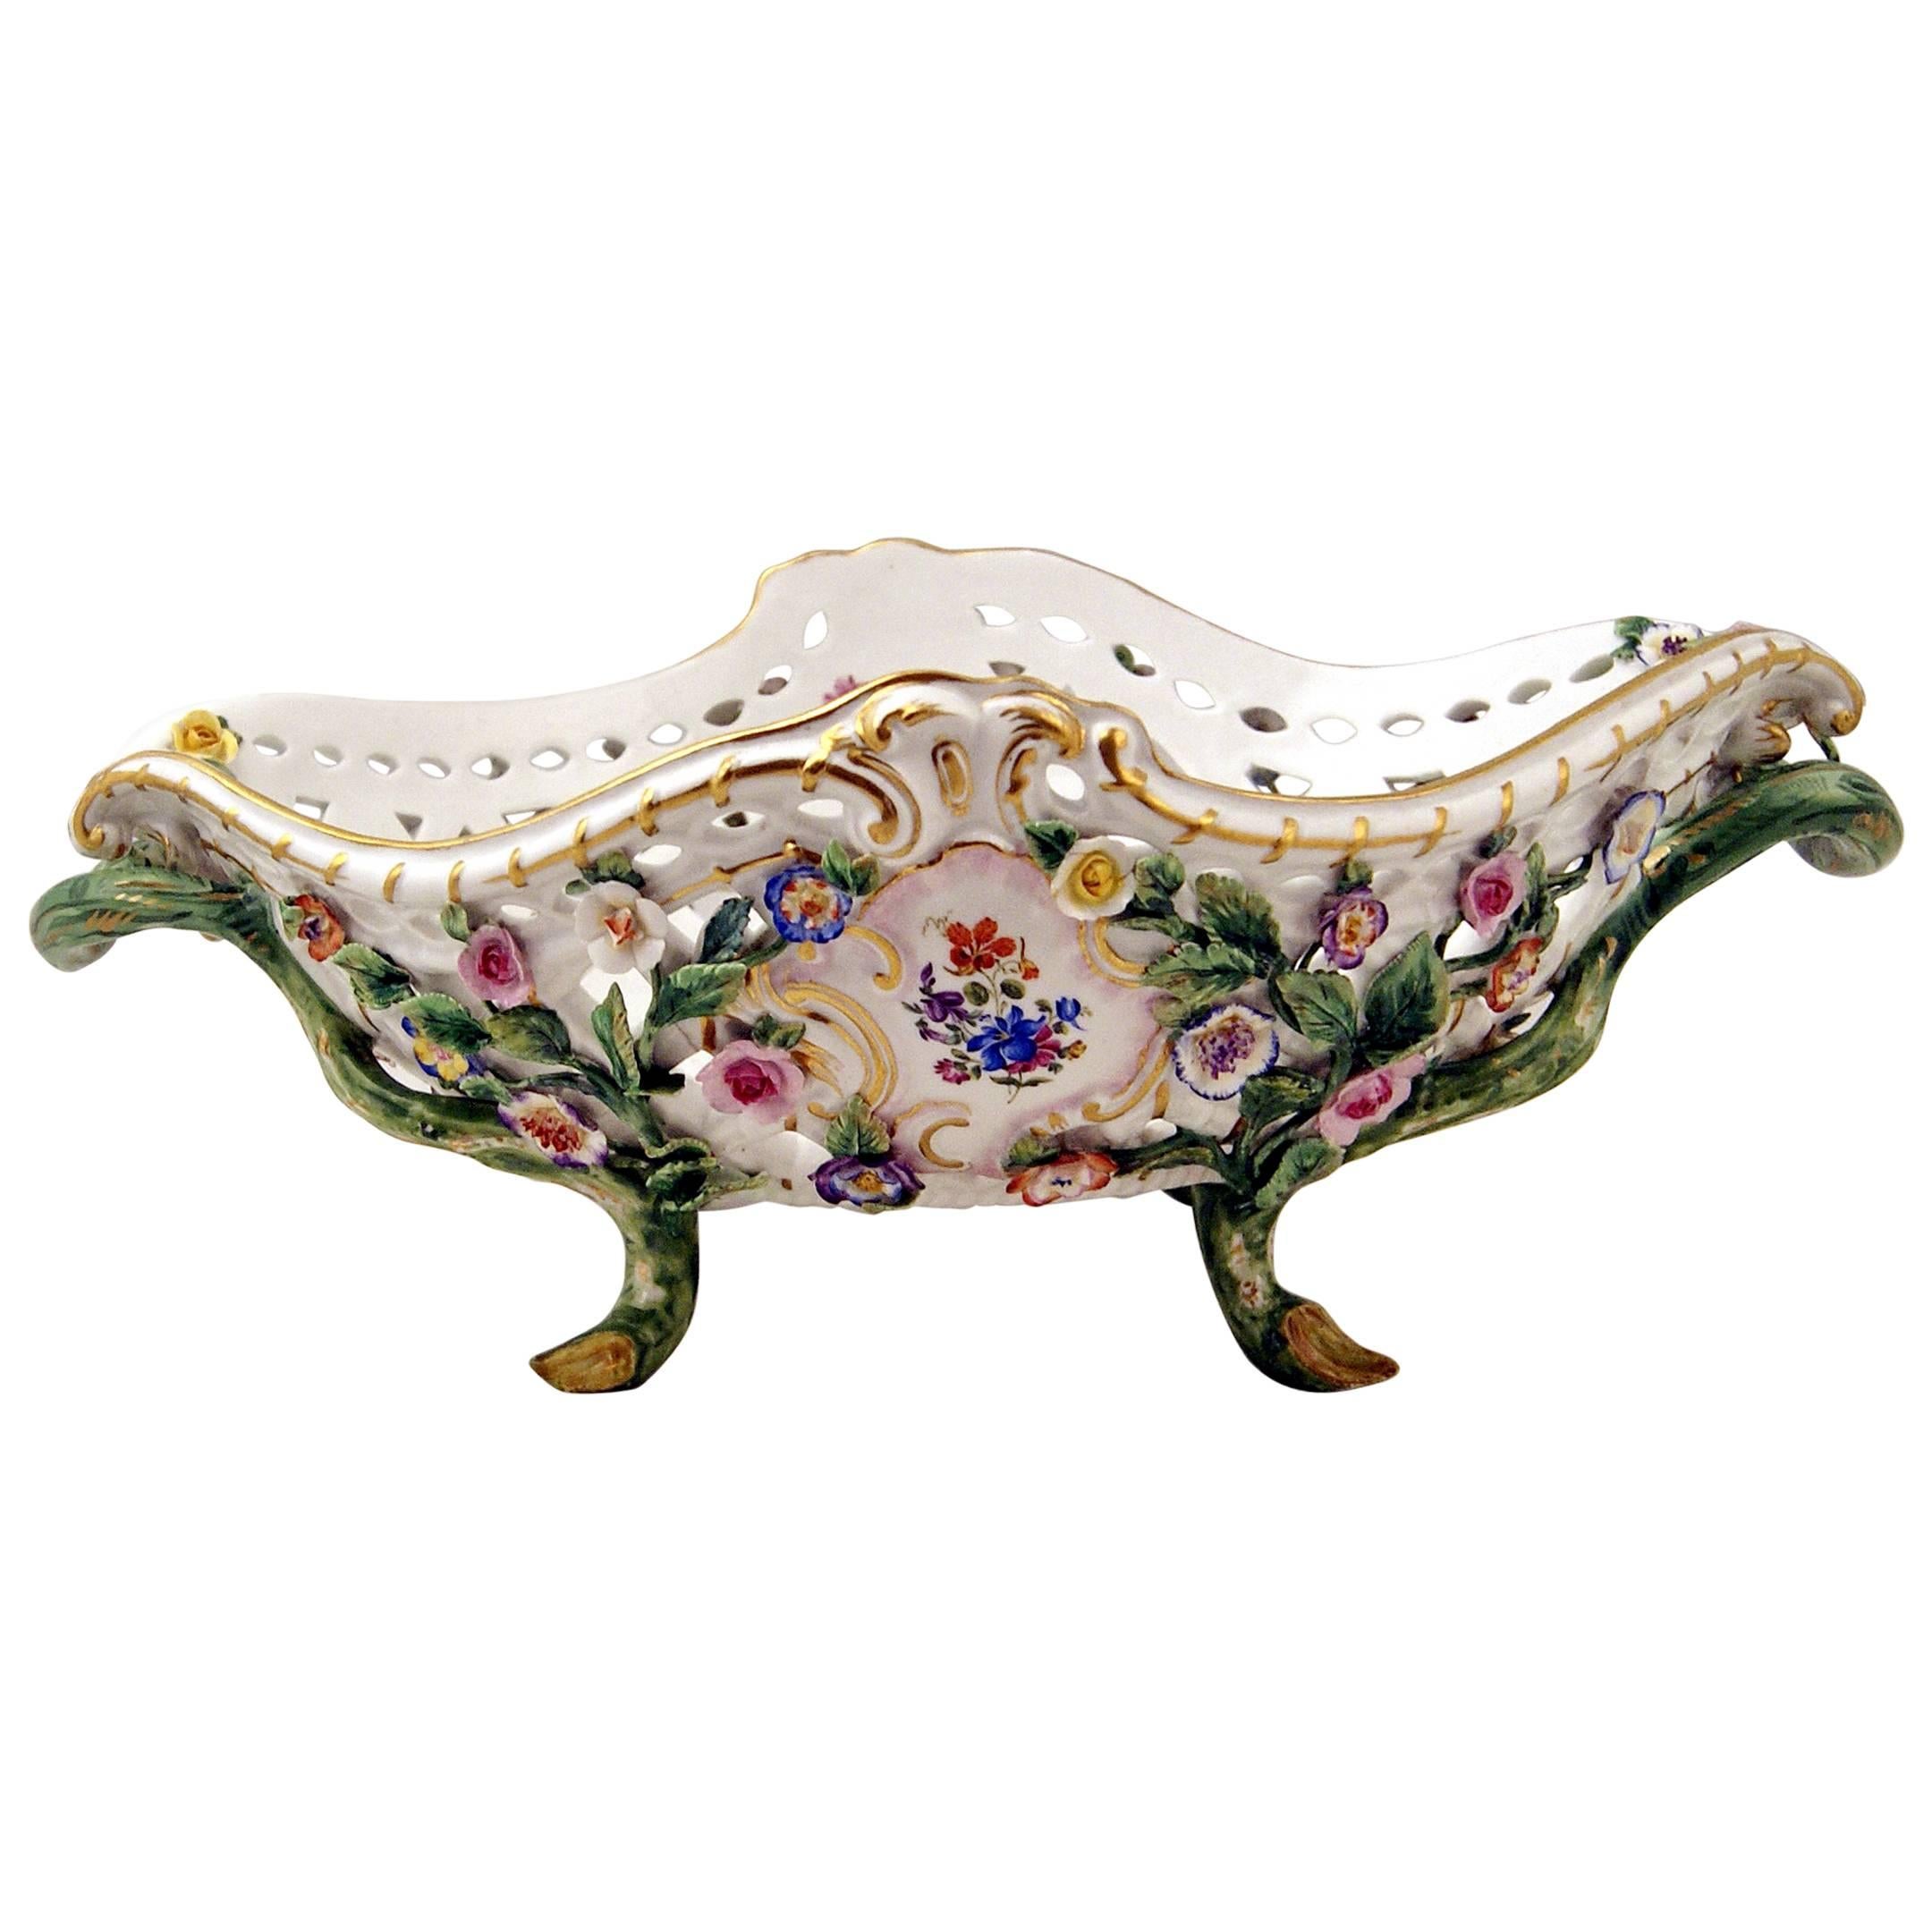 Meissen Large Oval Reticulated Basket Bowl with Flowers, circa 1850-1860